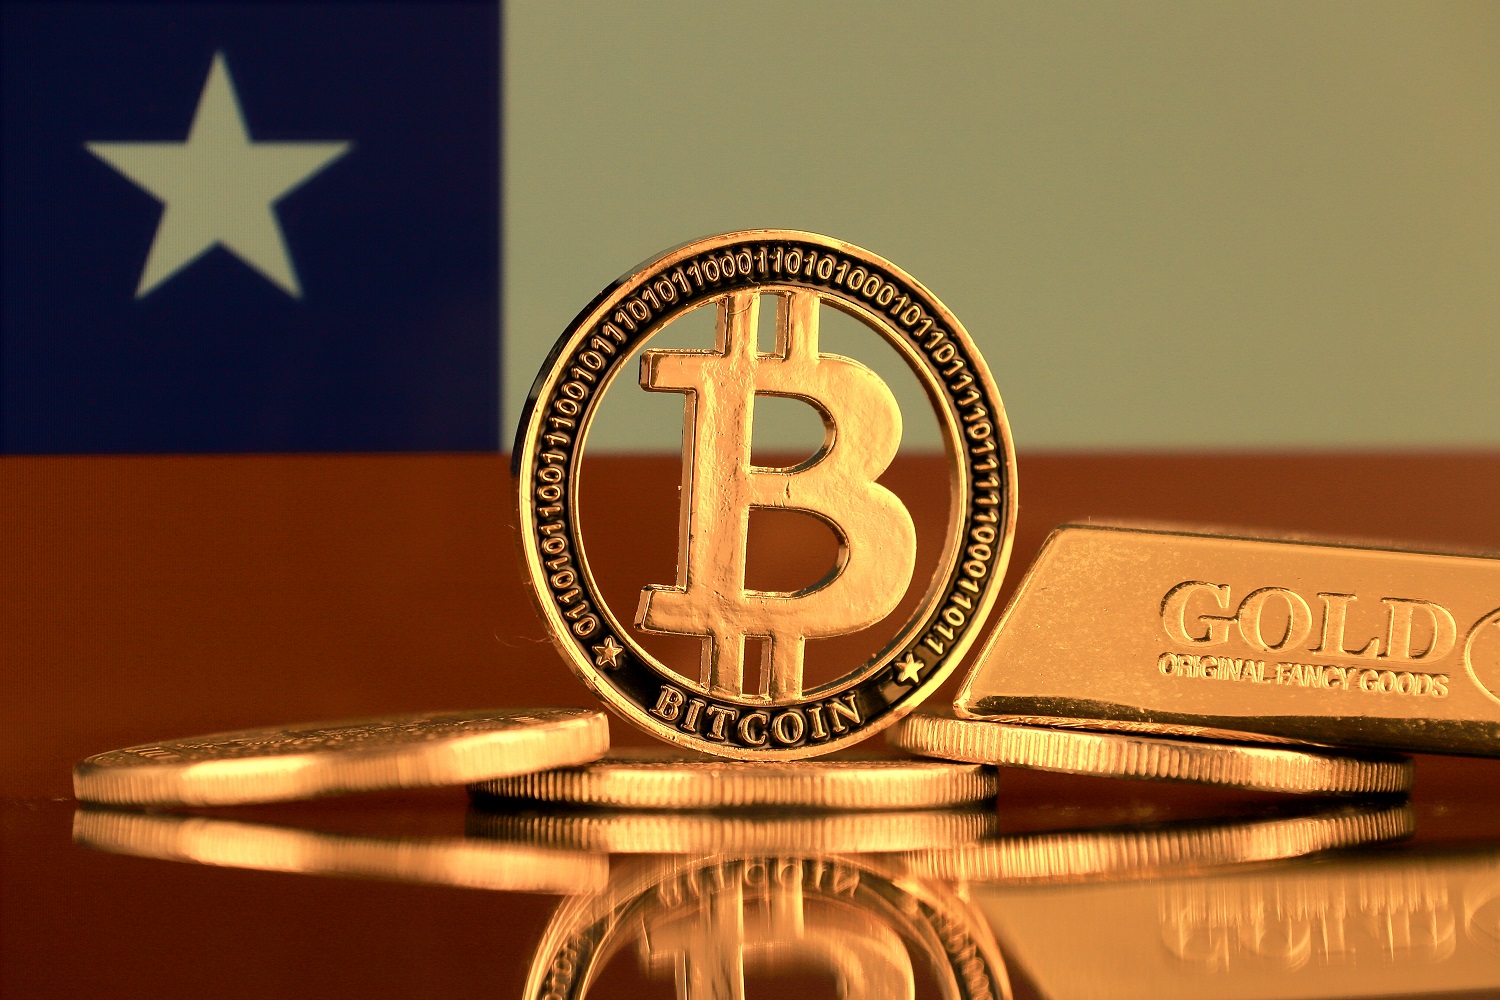 A metal token intended to represent Bitcoin, next to other tokens, a gold bar, against the backdrop of the Chilean Flag.